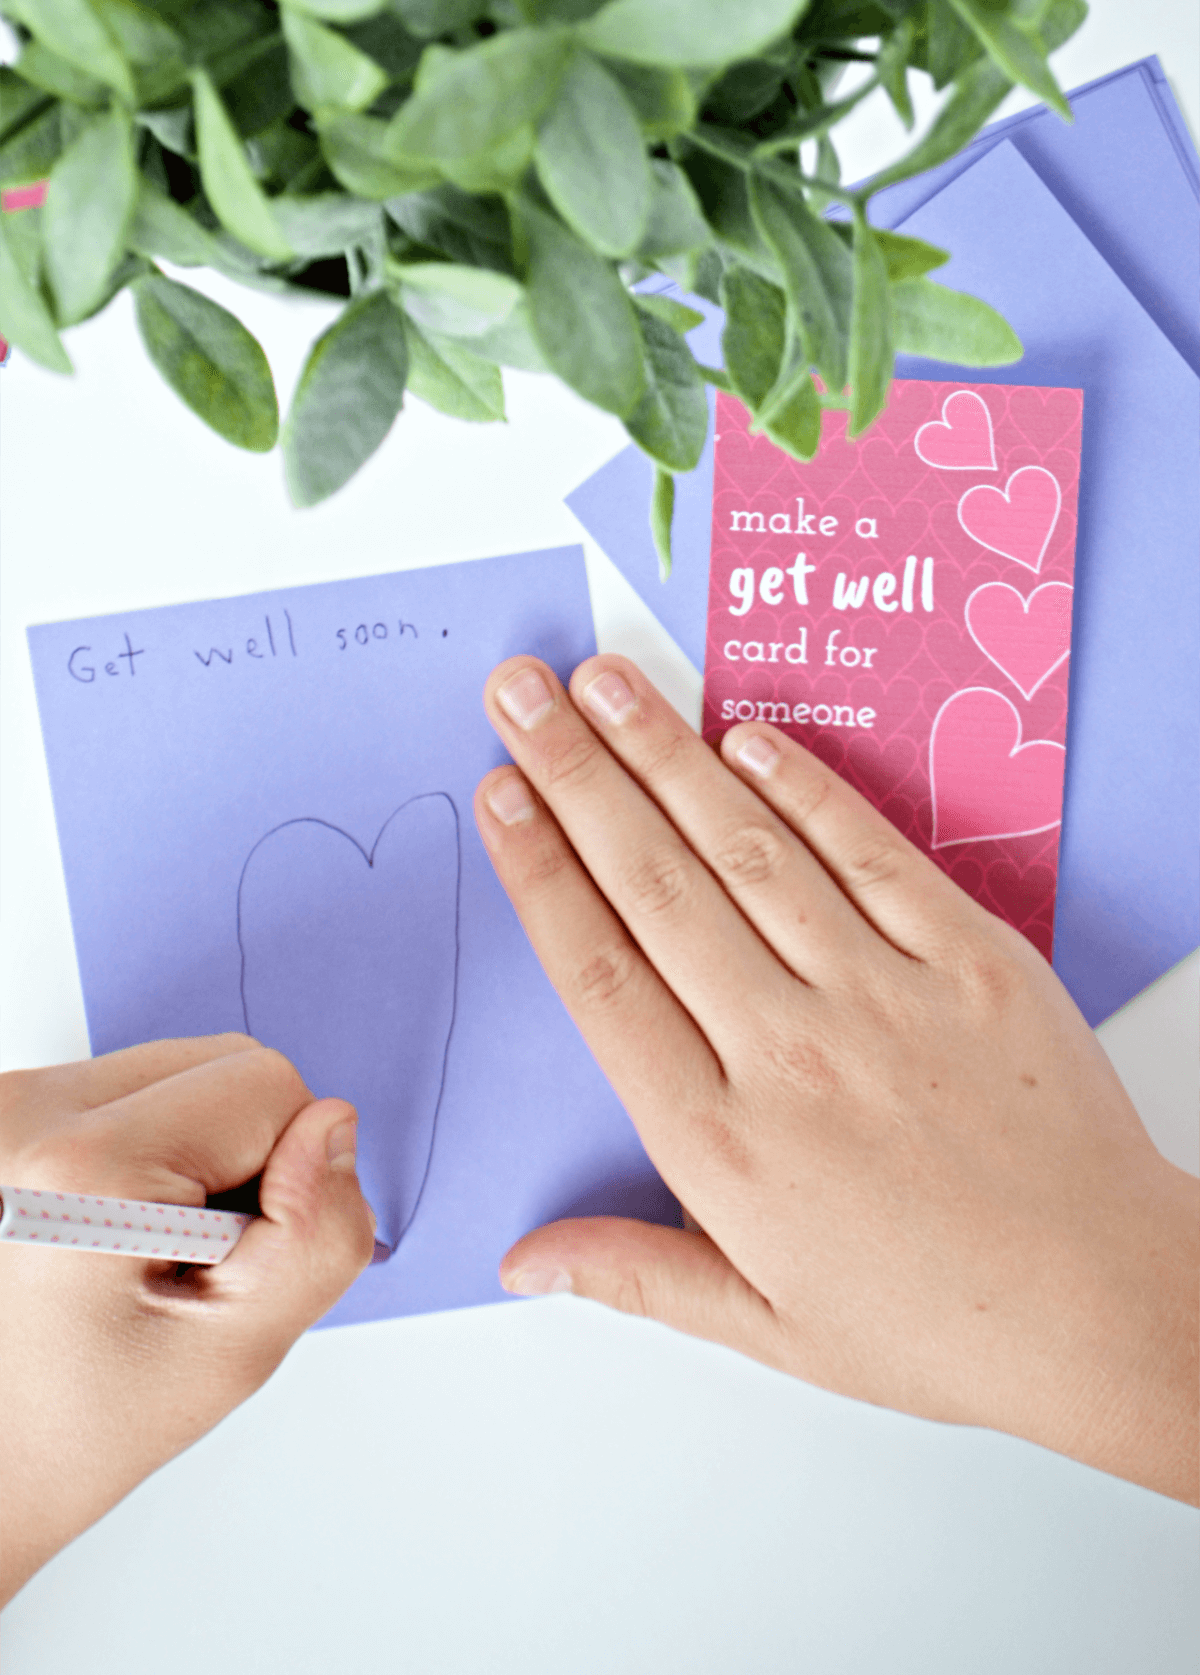 Random Acts of Kindness Cards